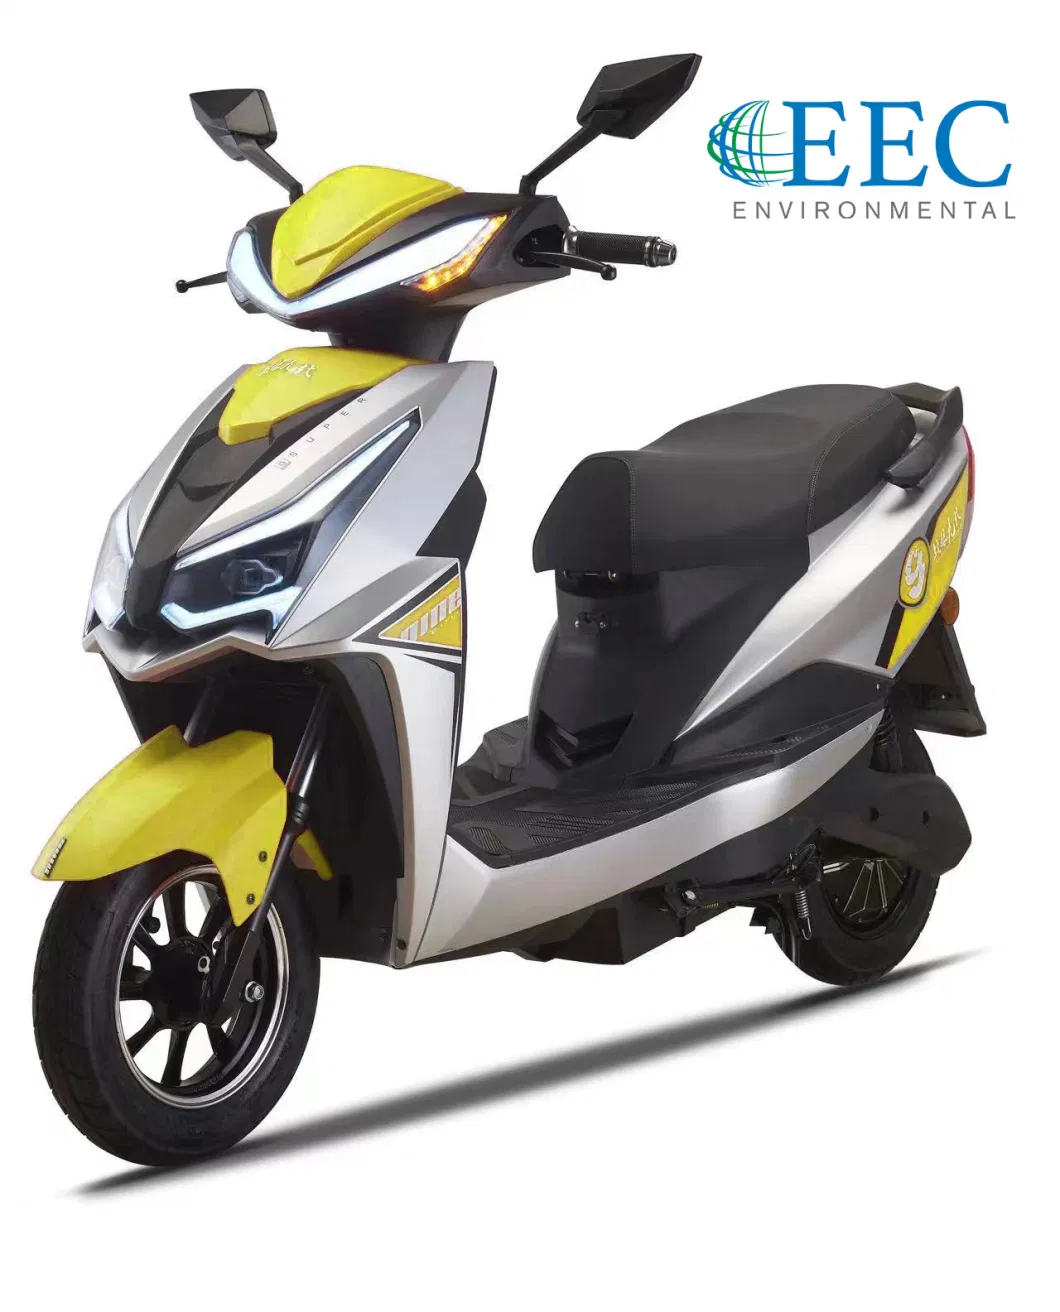 Long Range off Road Electric Scooter EEC L3e Electric Motorcycle Scooter for Adult Electric Bike Motorcycles Stealth Bomber